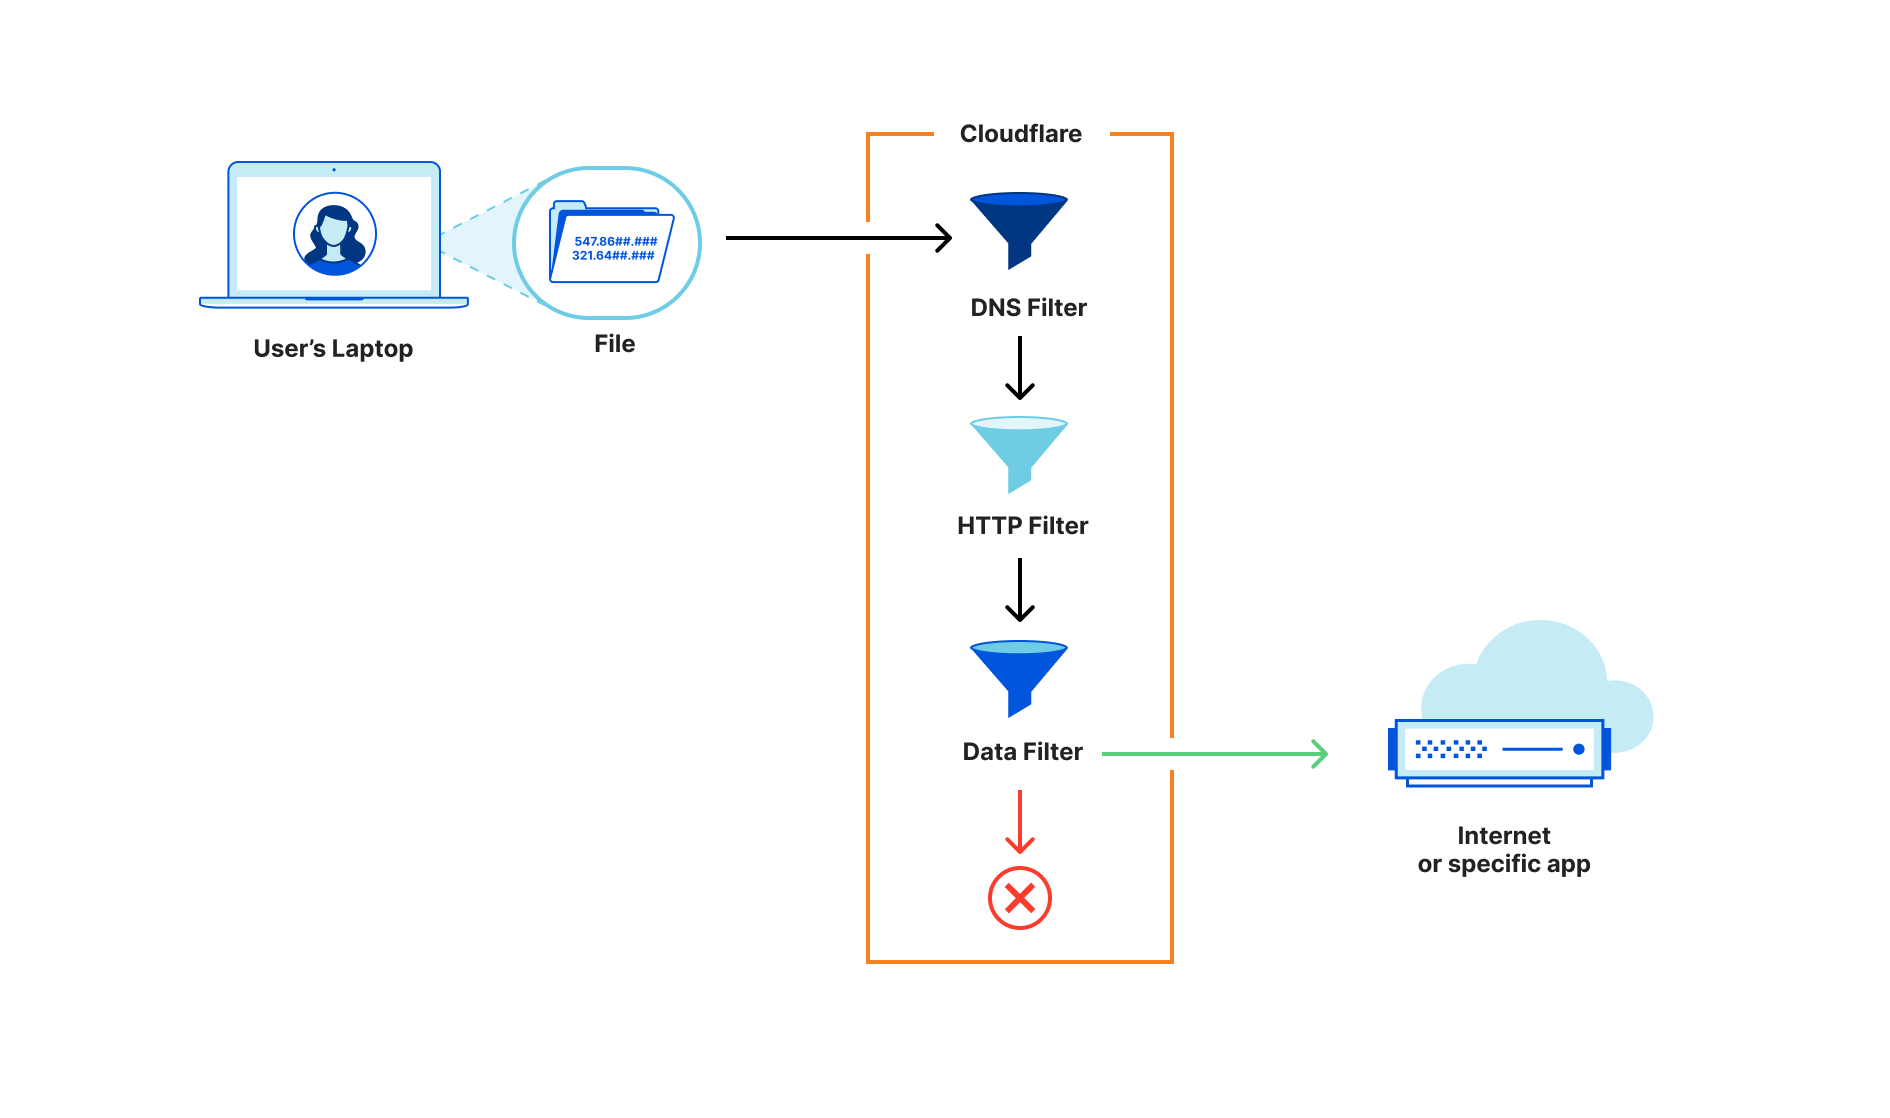 Cloudflare’s DLP capabilities apply standard, consistent rules around what data can leave your organization regardless of how that traffic arrived in our network.